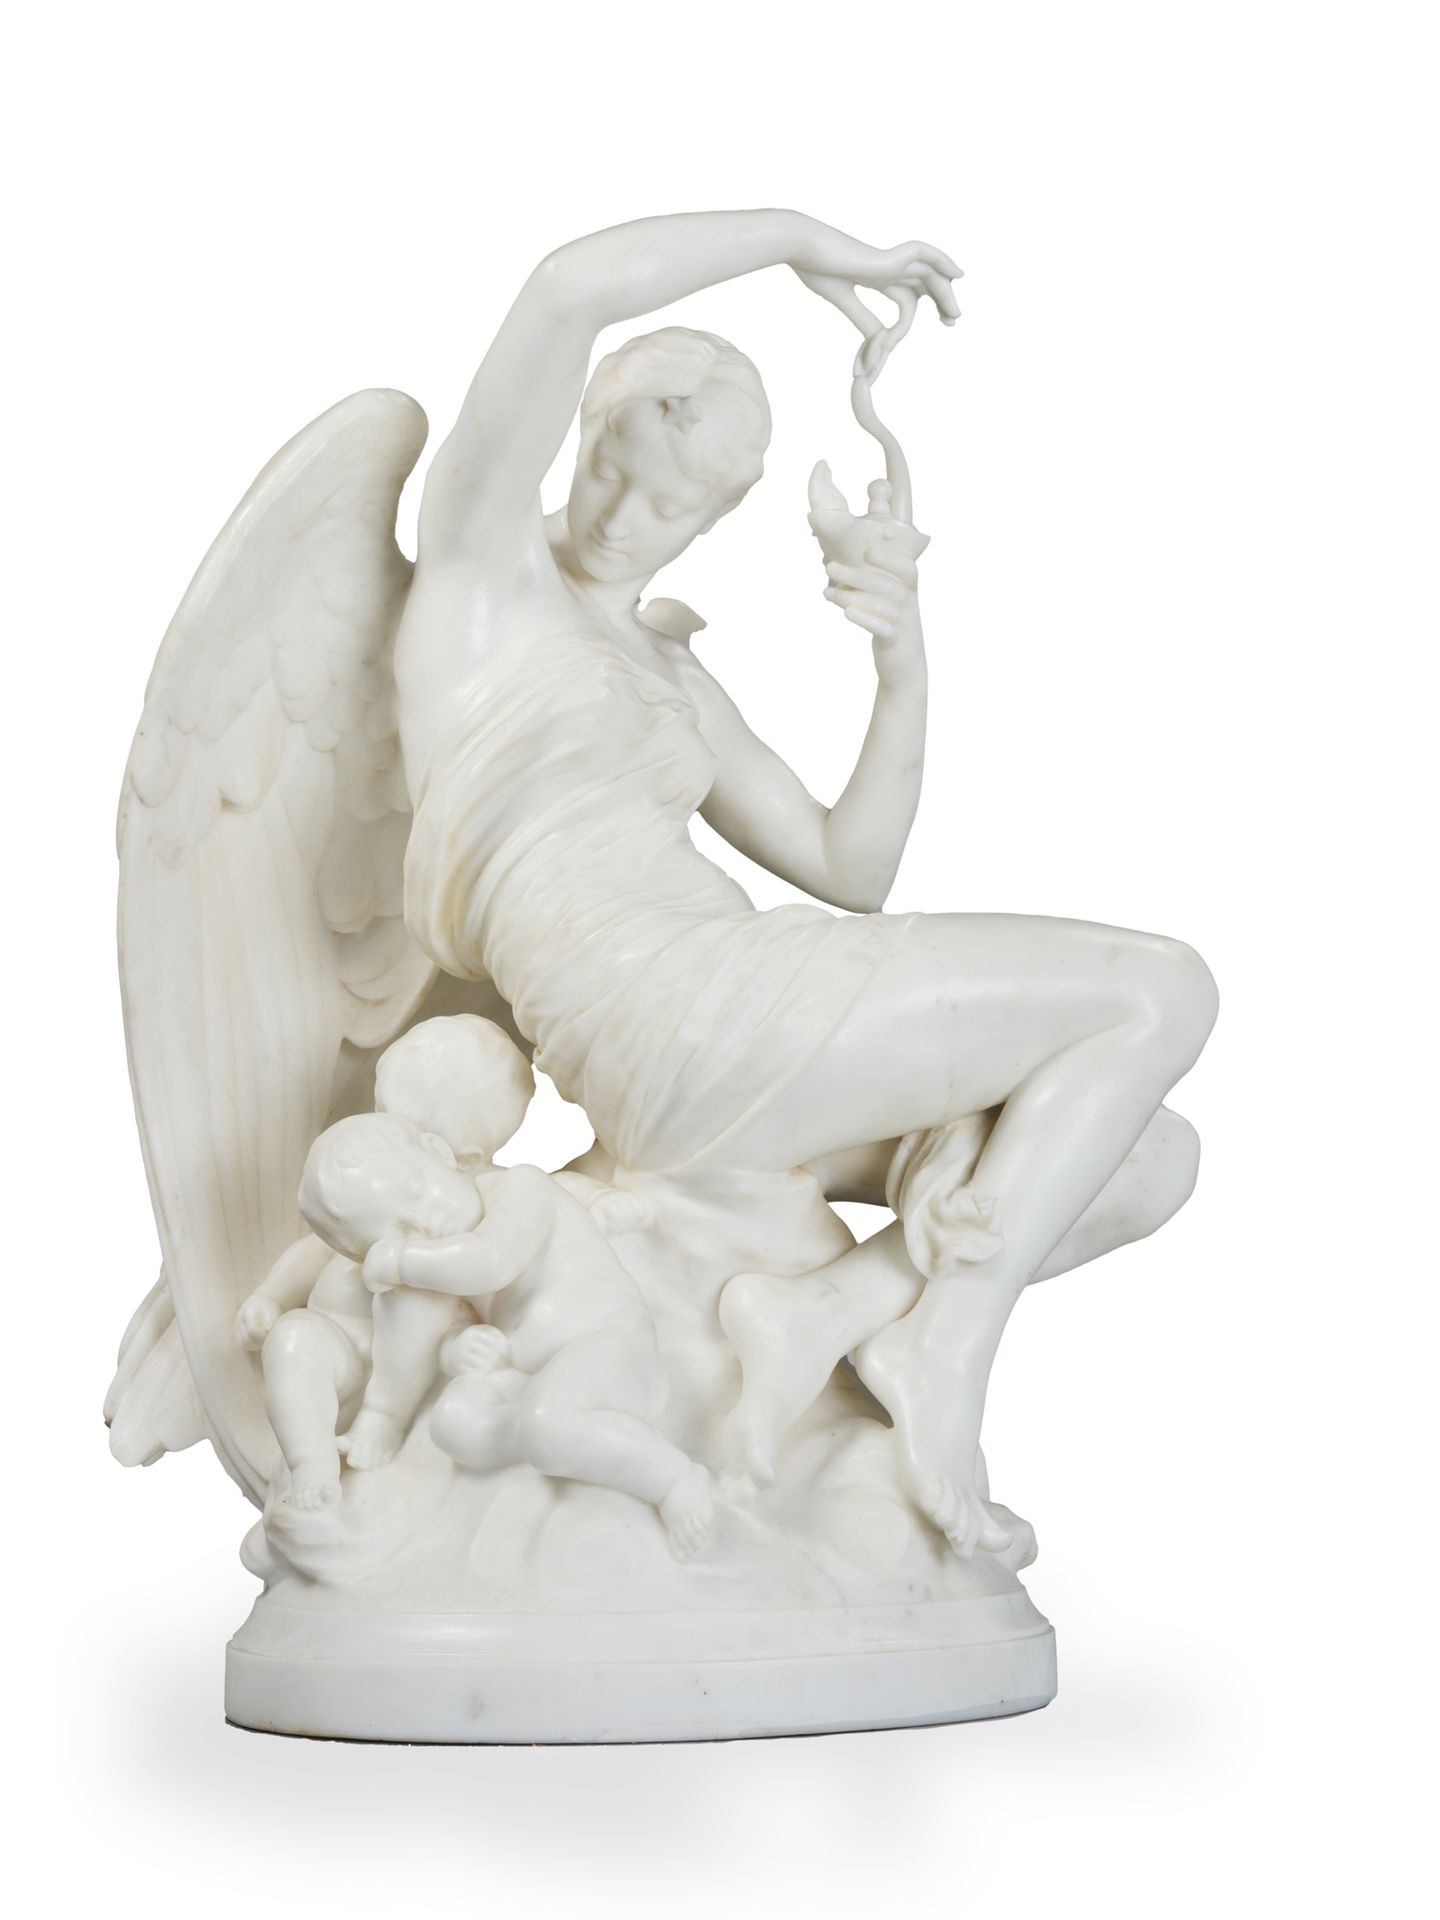 Emile-André BOISSEAU (1842-1923) Twilight
Sculpture in white marble
Signed on th&hellip;